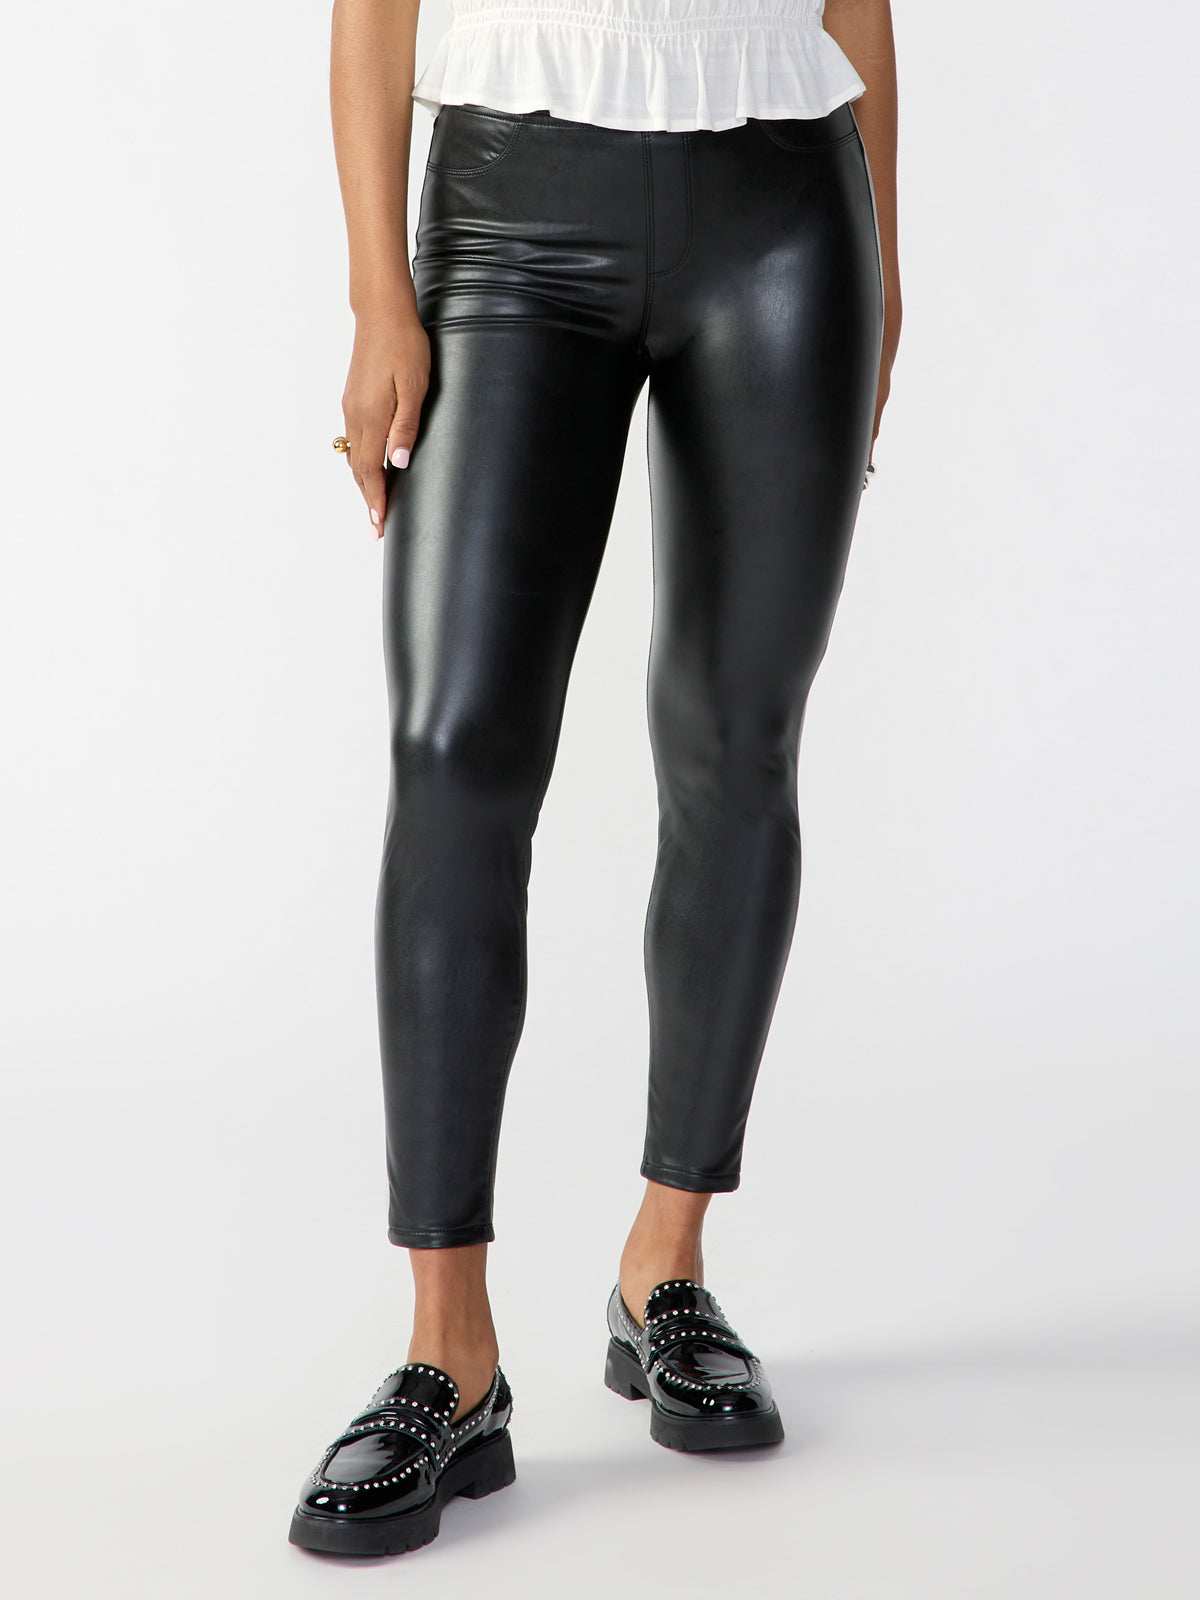 Sanctuary Black Fitted Skinny Pants Leggings Stretch Rayon Nylon Spandex  Minimal Size M - $39 (75% Off Retail) - From Lia